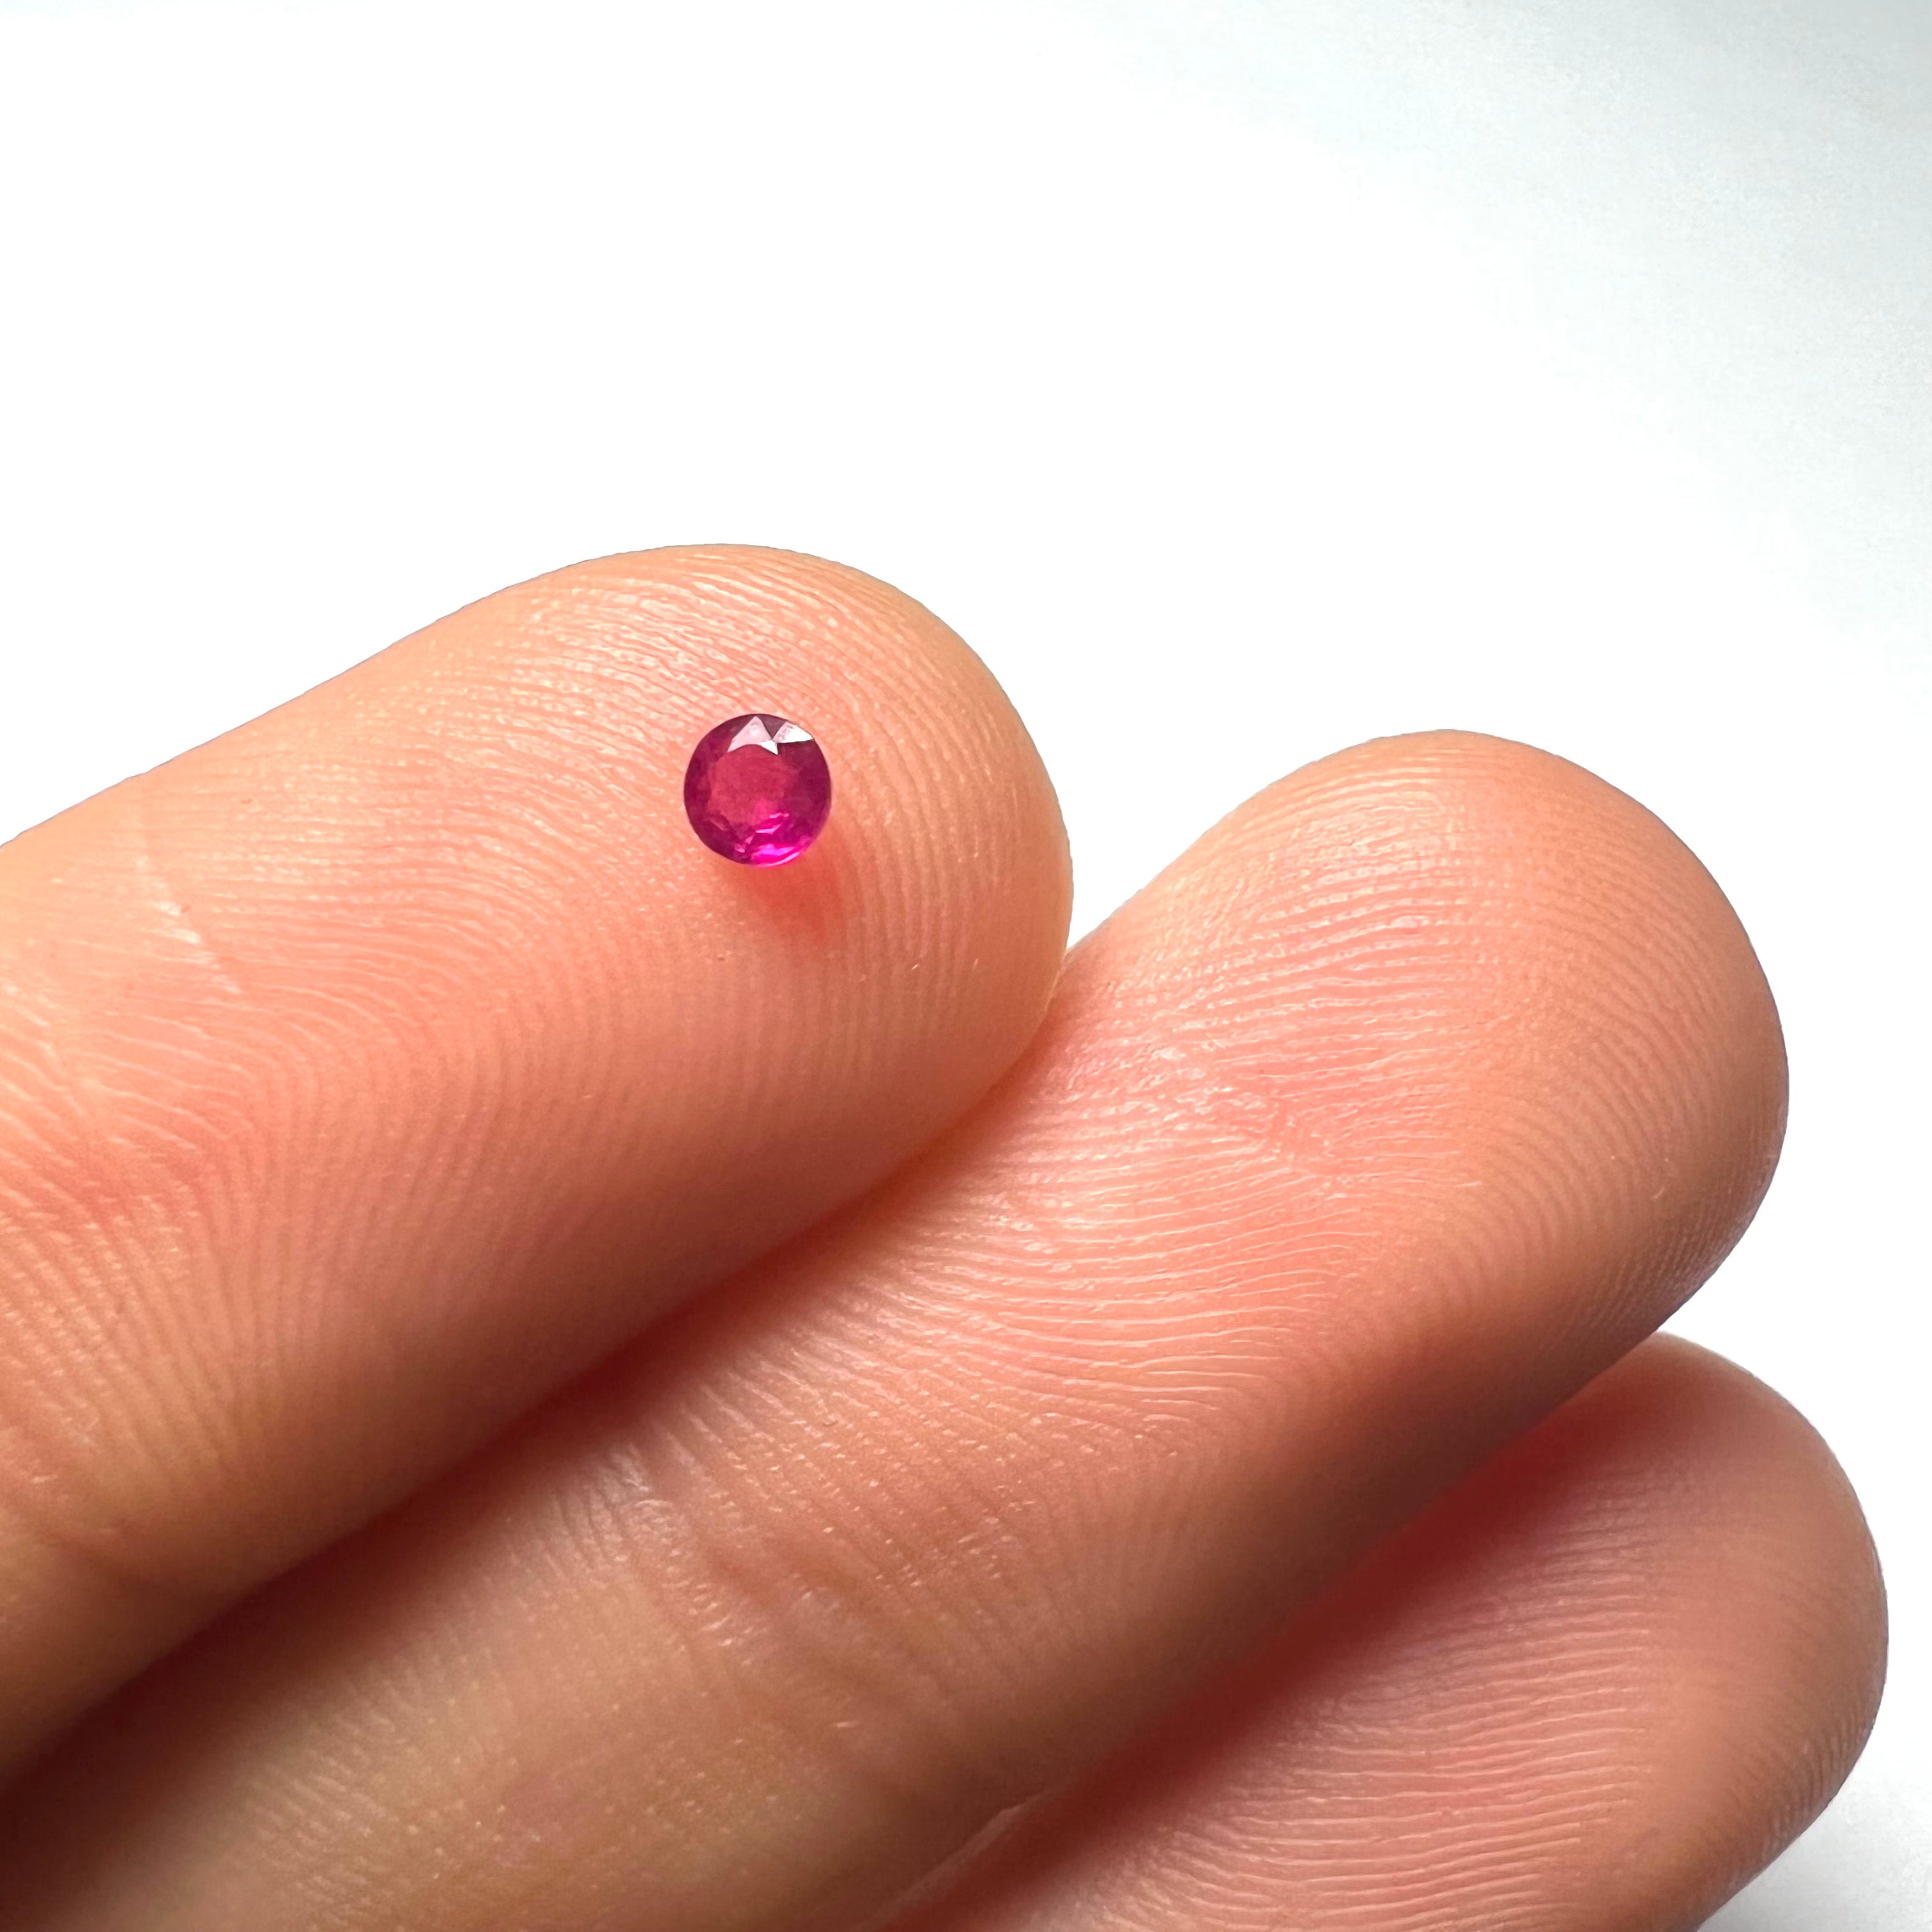 .12CT Loose Natural Ruby 3.2x1.2mm Earth mined Gemstone